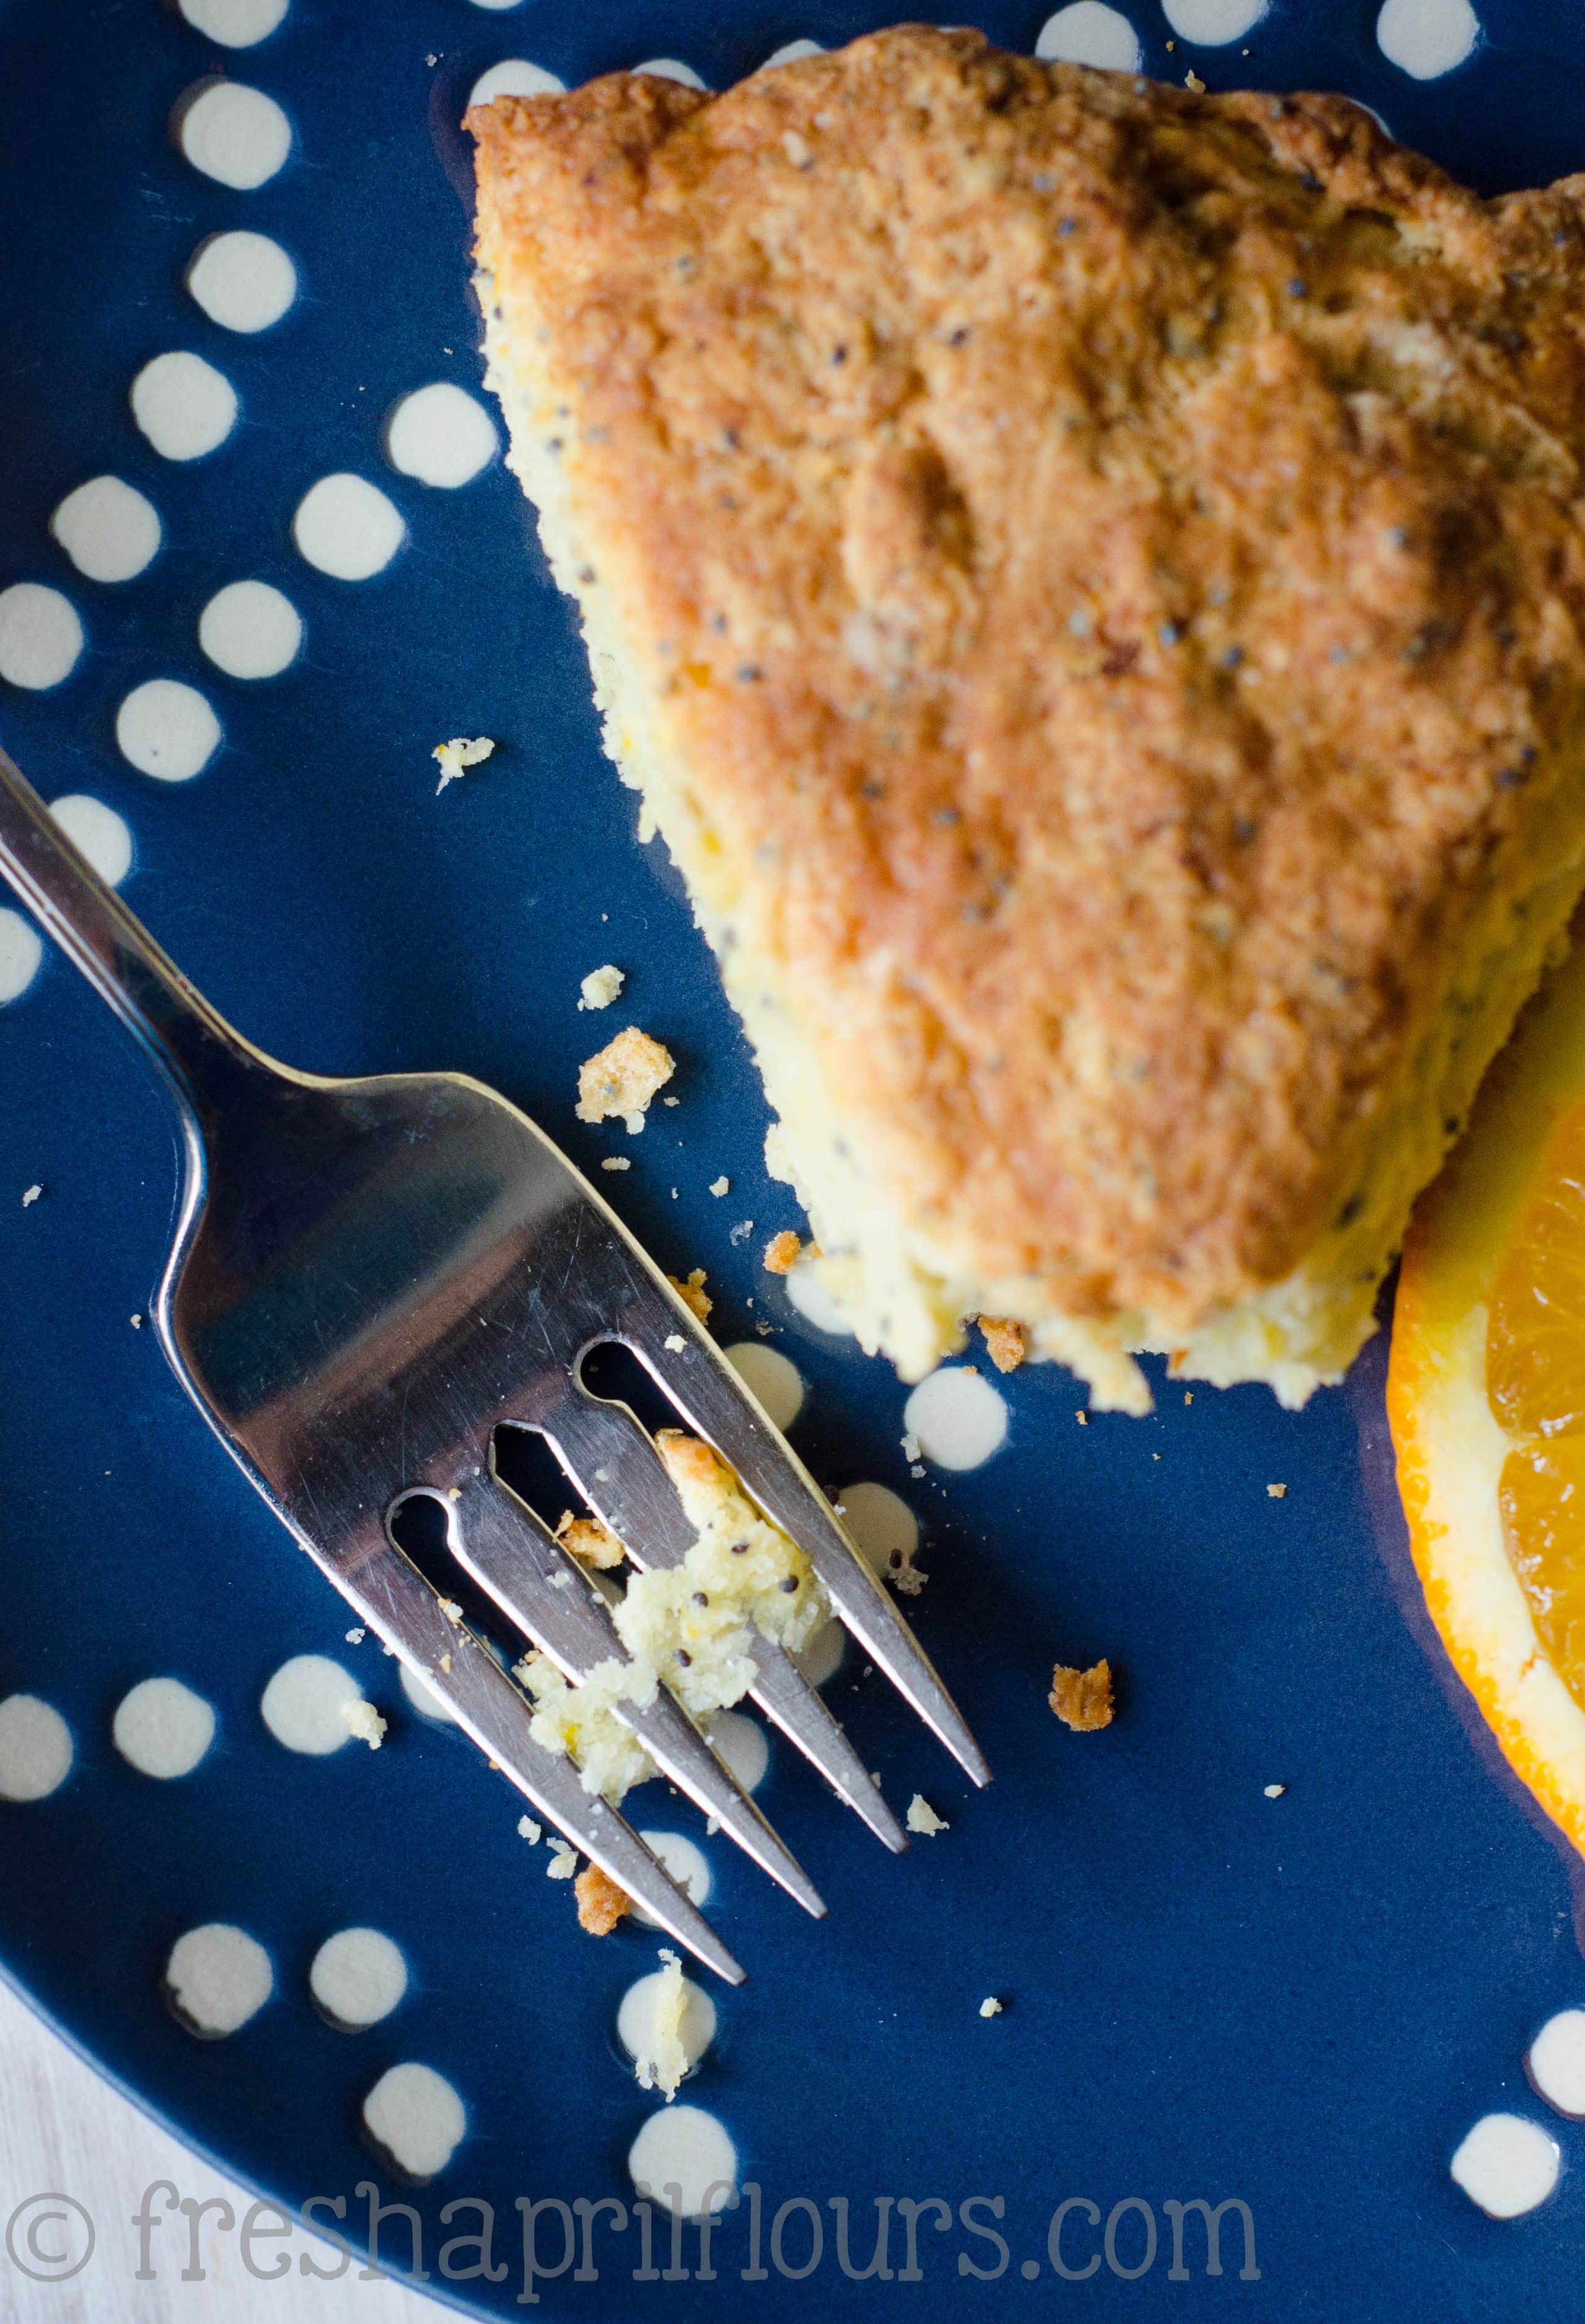 Orange poppy seed scone on a plate with a fork.